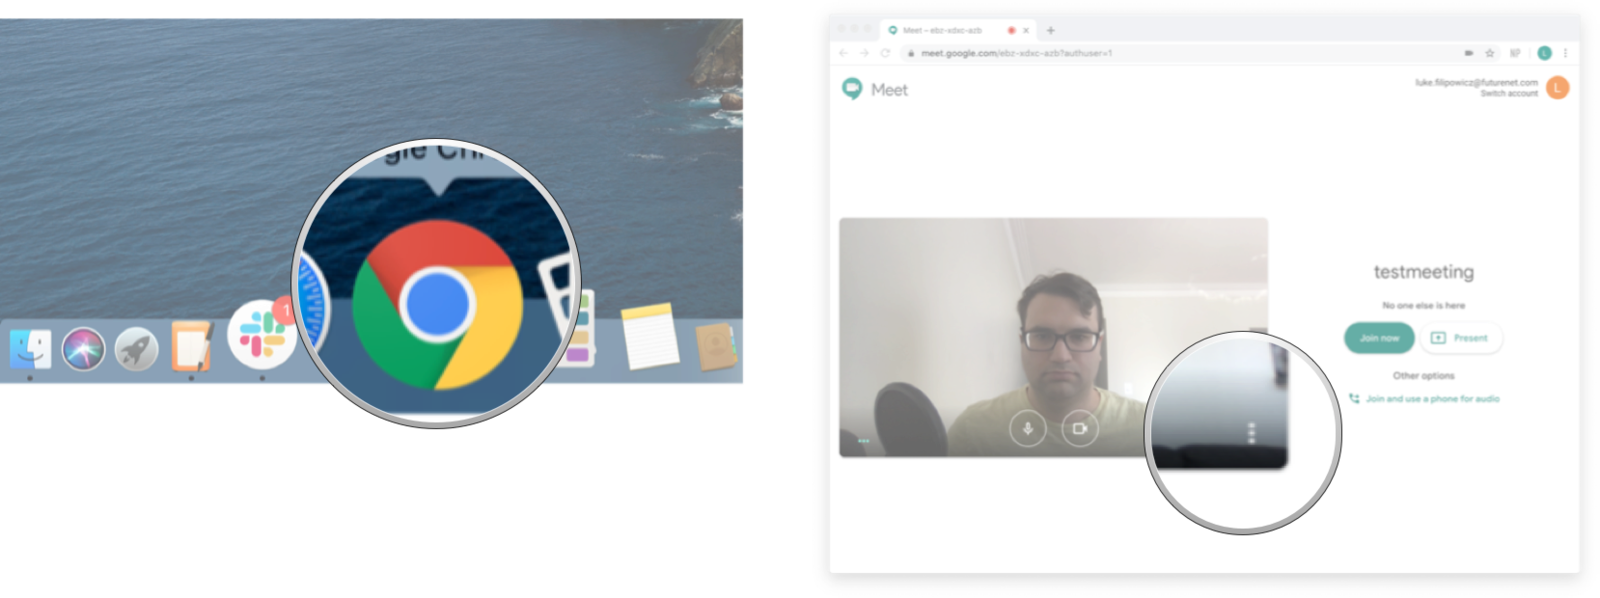 turn on video camera on mac for hangouts